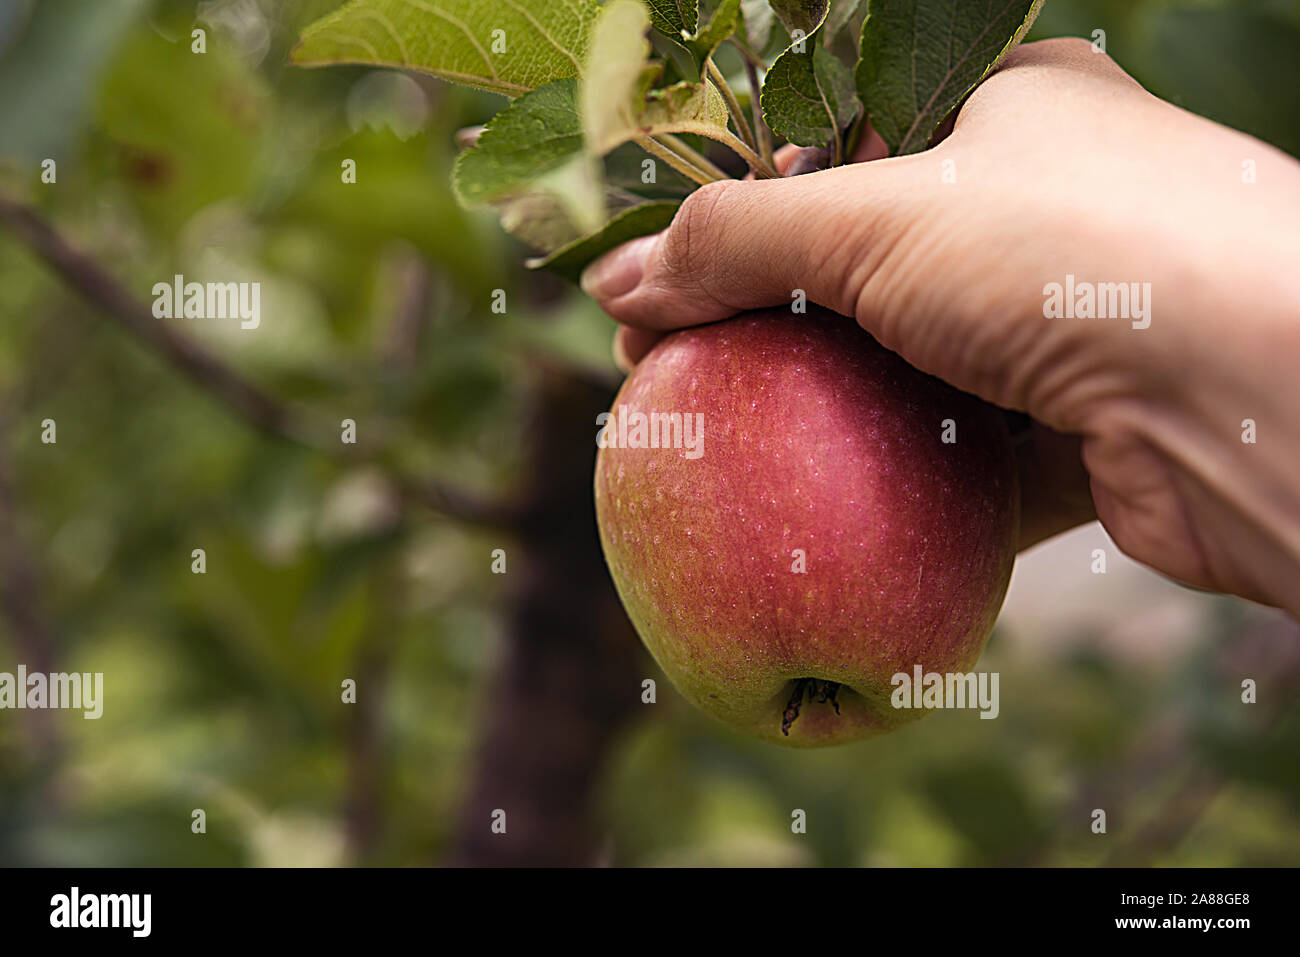 Ripe red side apple in woman's hand, surrounded by green leaves and branches of real apple tree. Autumn or summer harvest time and healthy eating conc Stock Photo